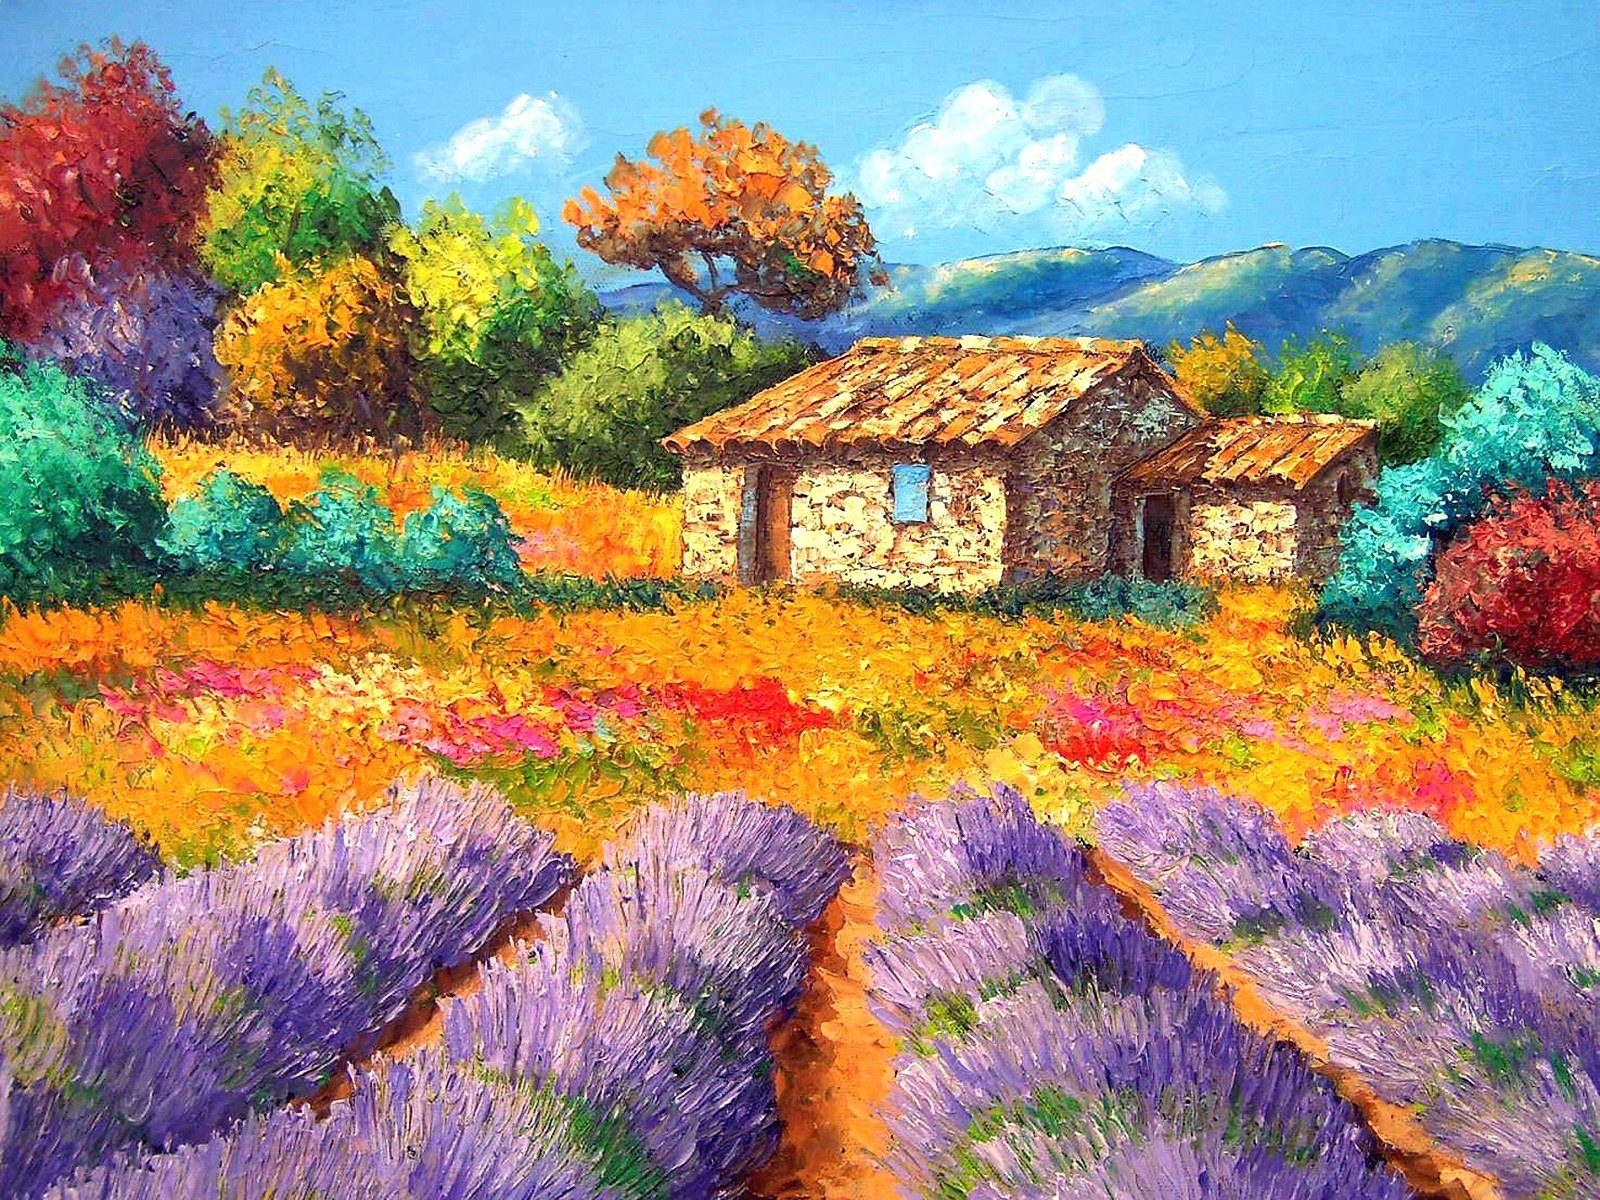 50 Beautiful Painting Art To Get Inspire - The WoW Style